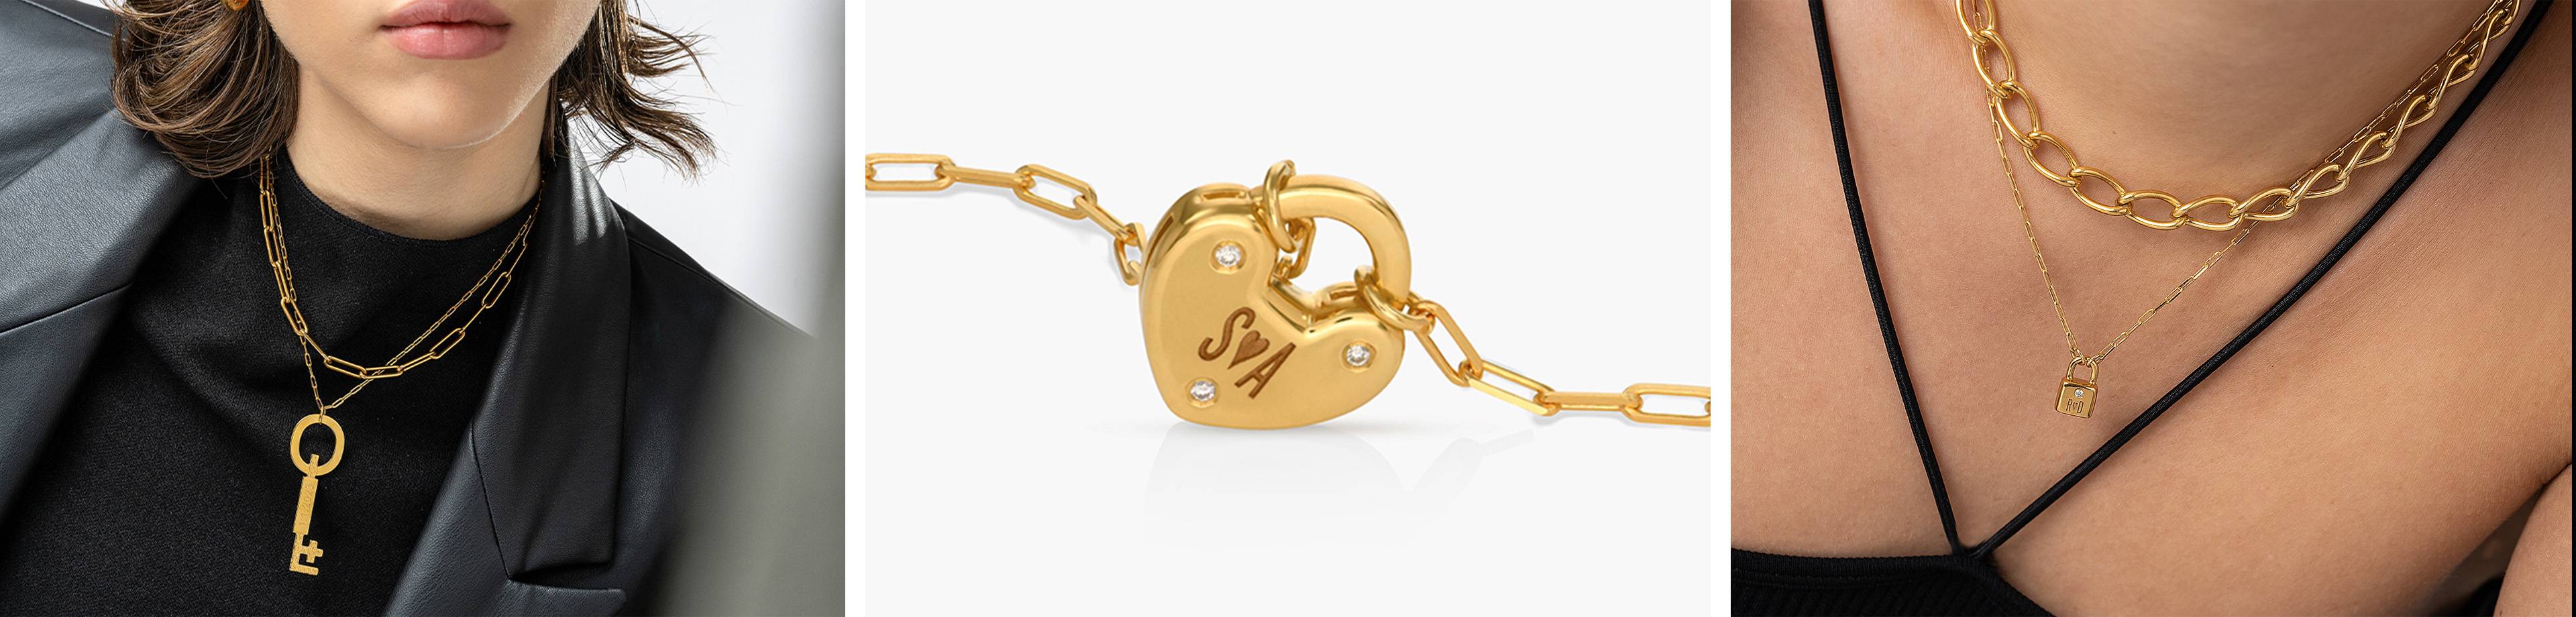 Padlock and key necklaces